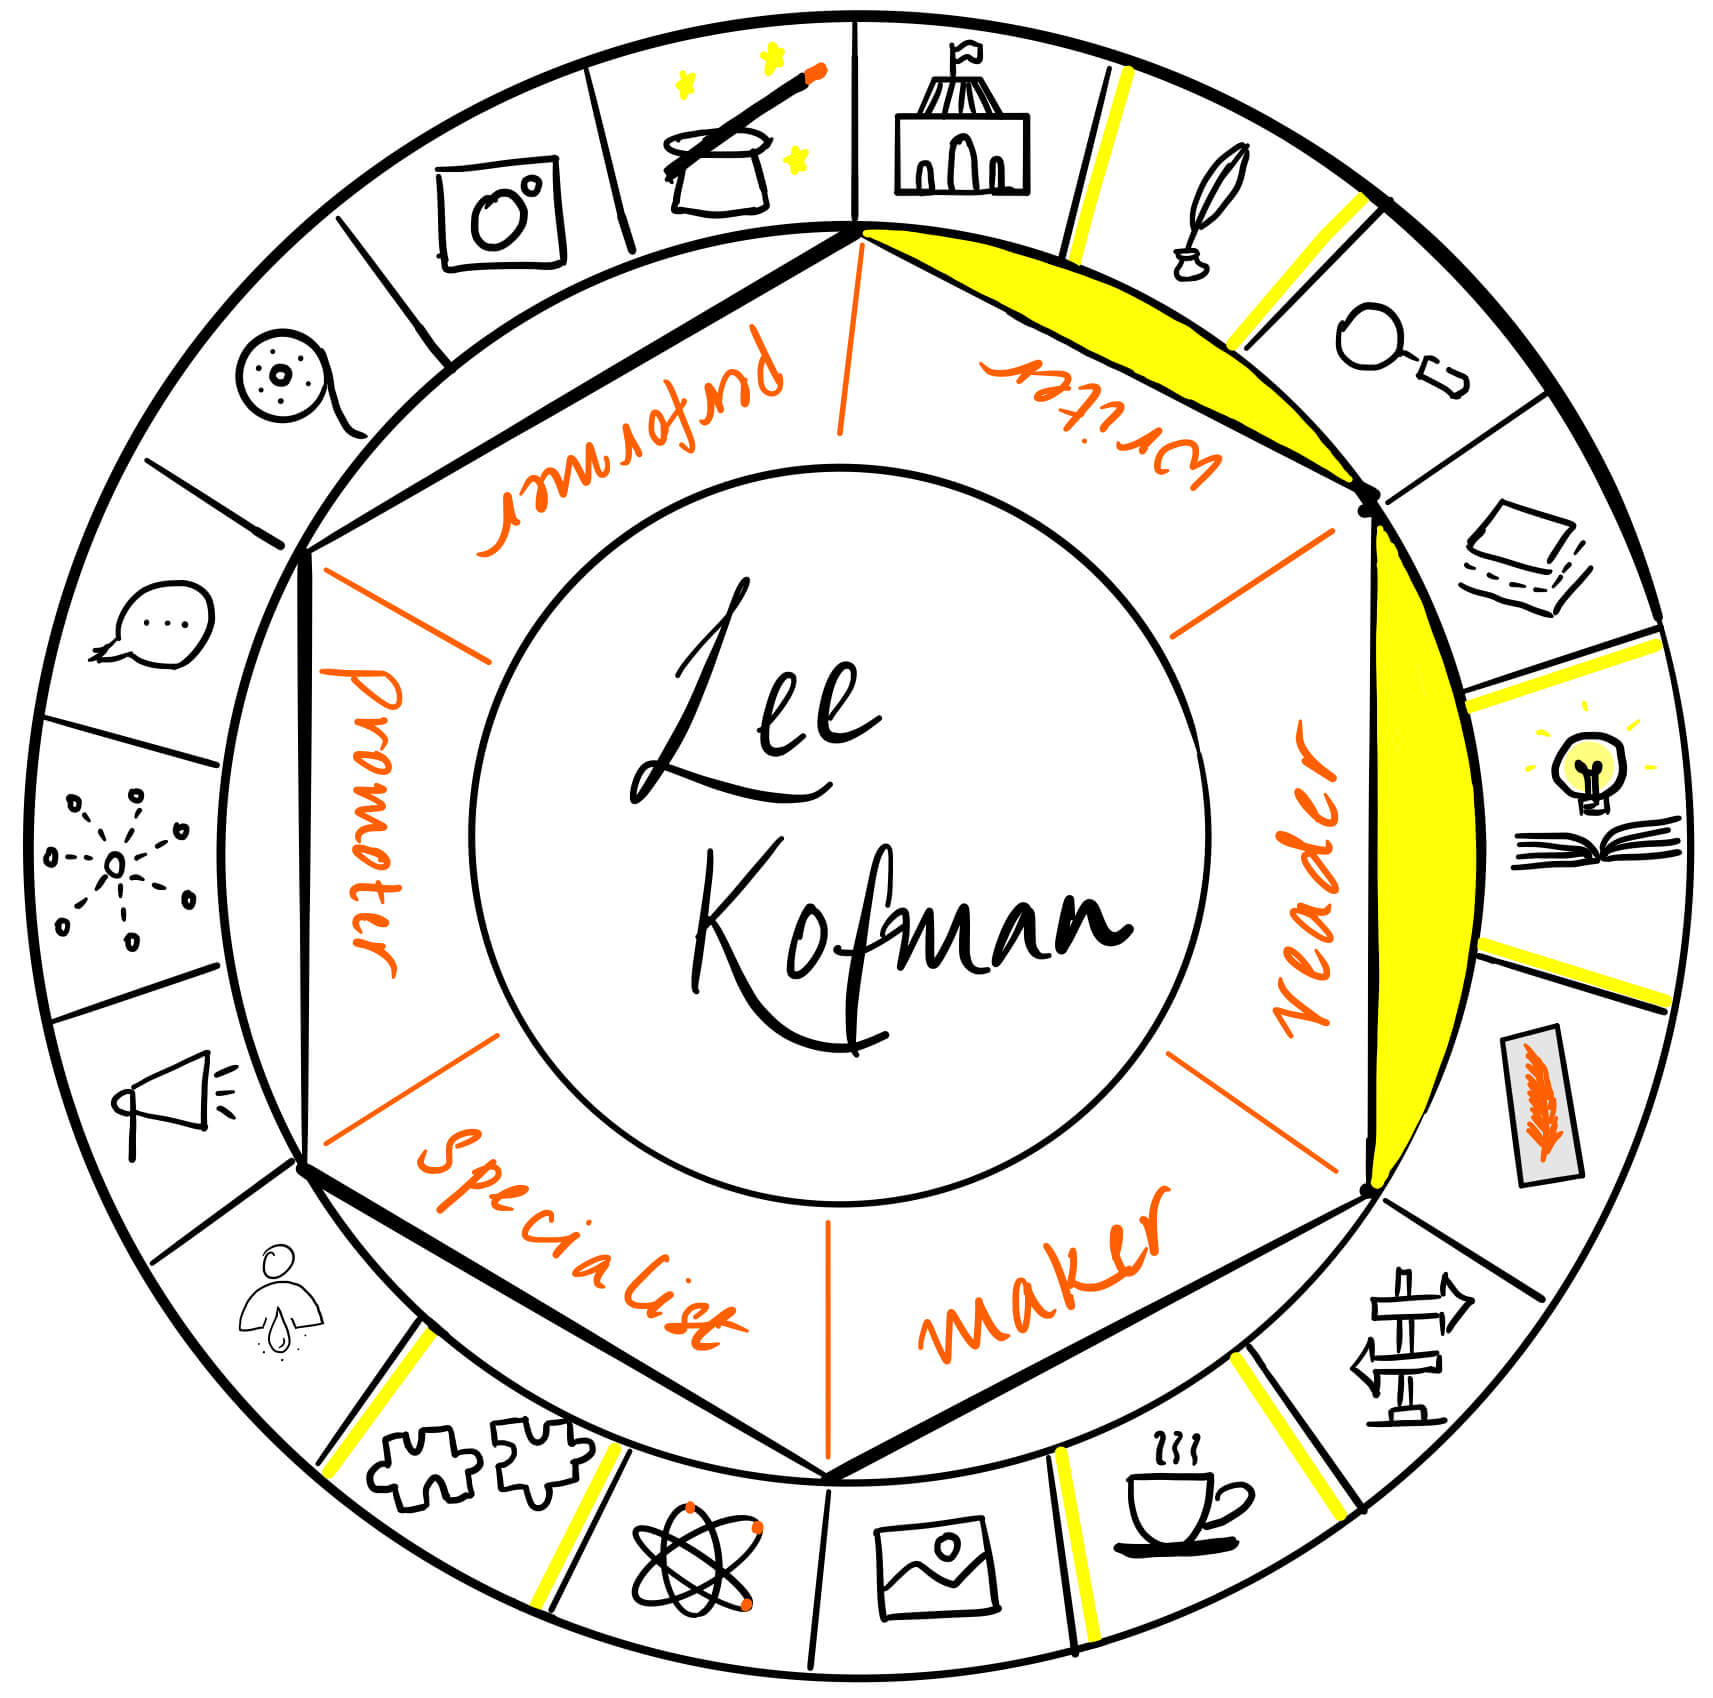 Lee Kofman is a reader and writer. It's a pleasure to have her over on The Creator's Roulette to talk about her research and experiences in writing the body.